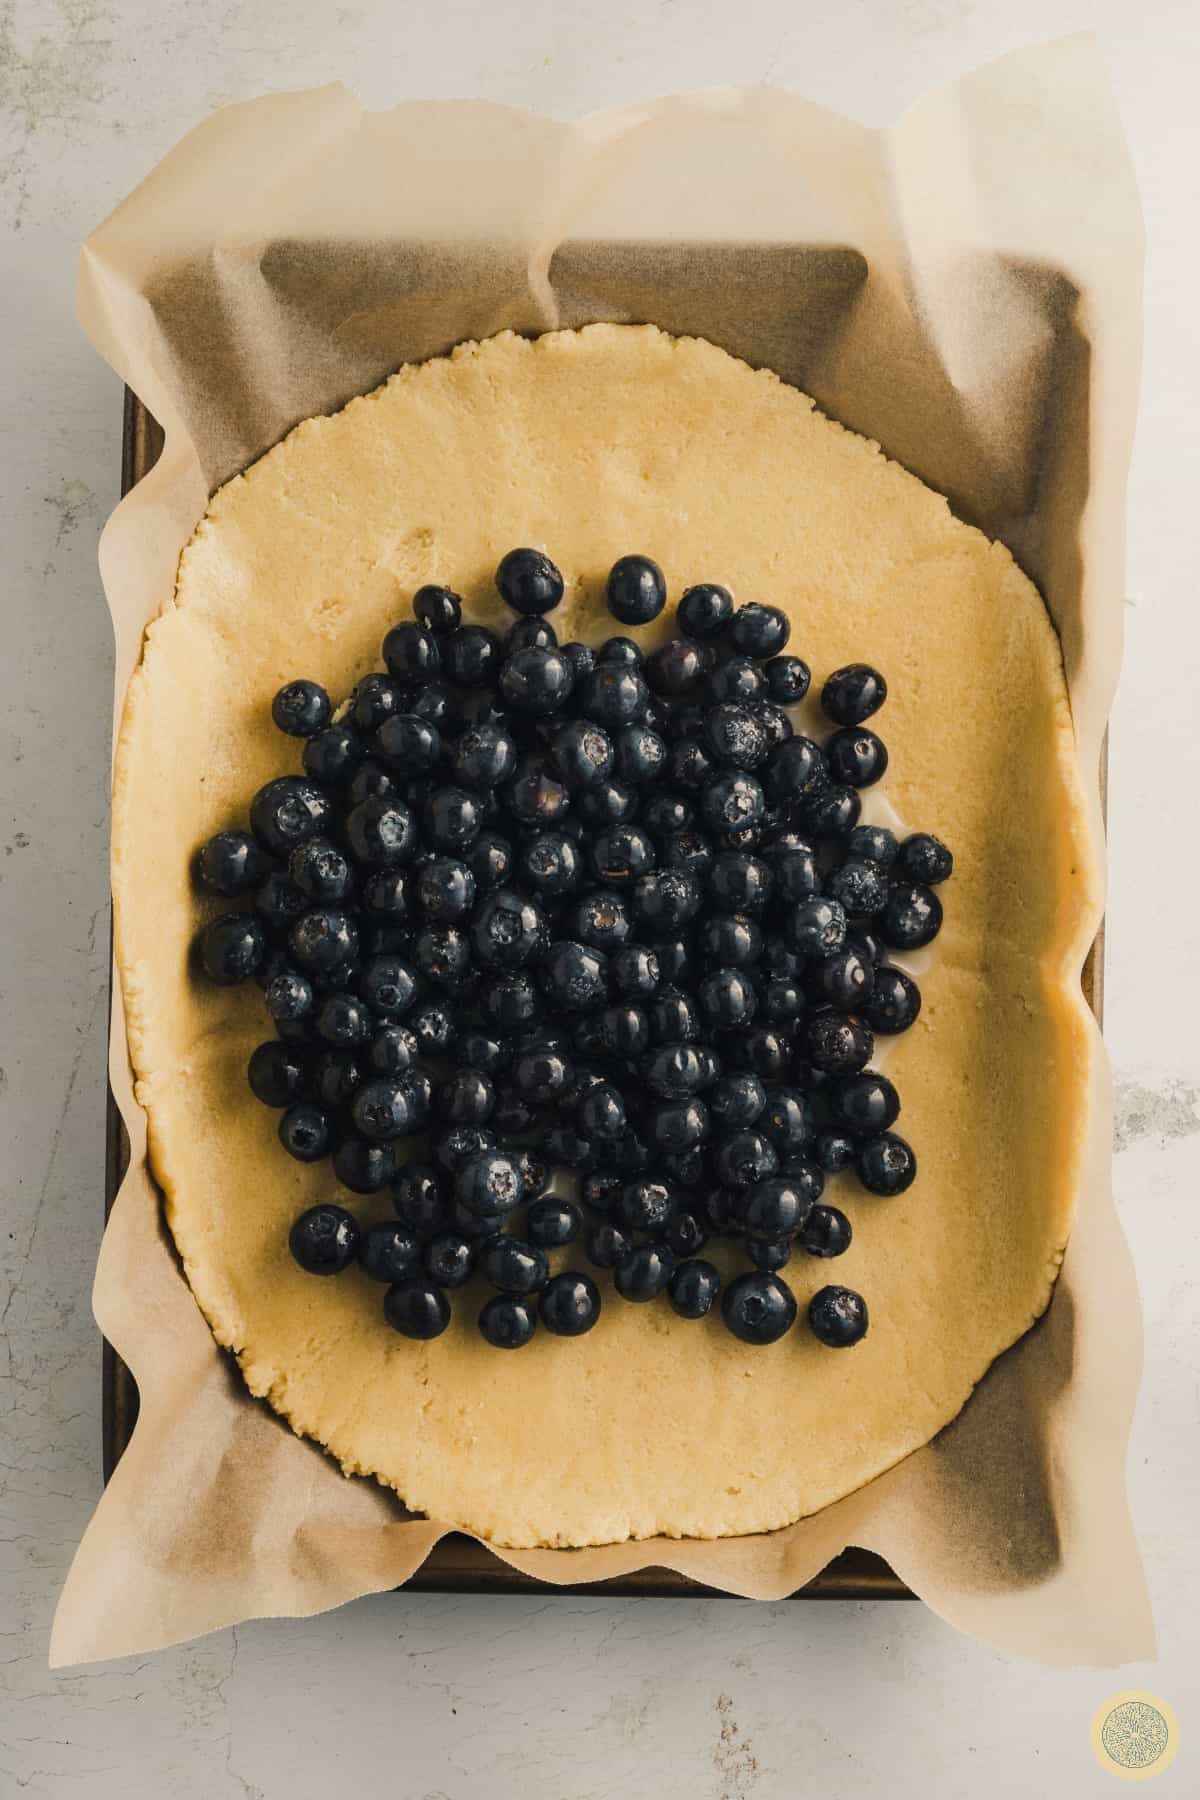 galette crust is a rustic form of a tart or pie